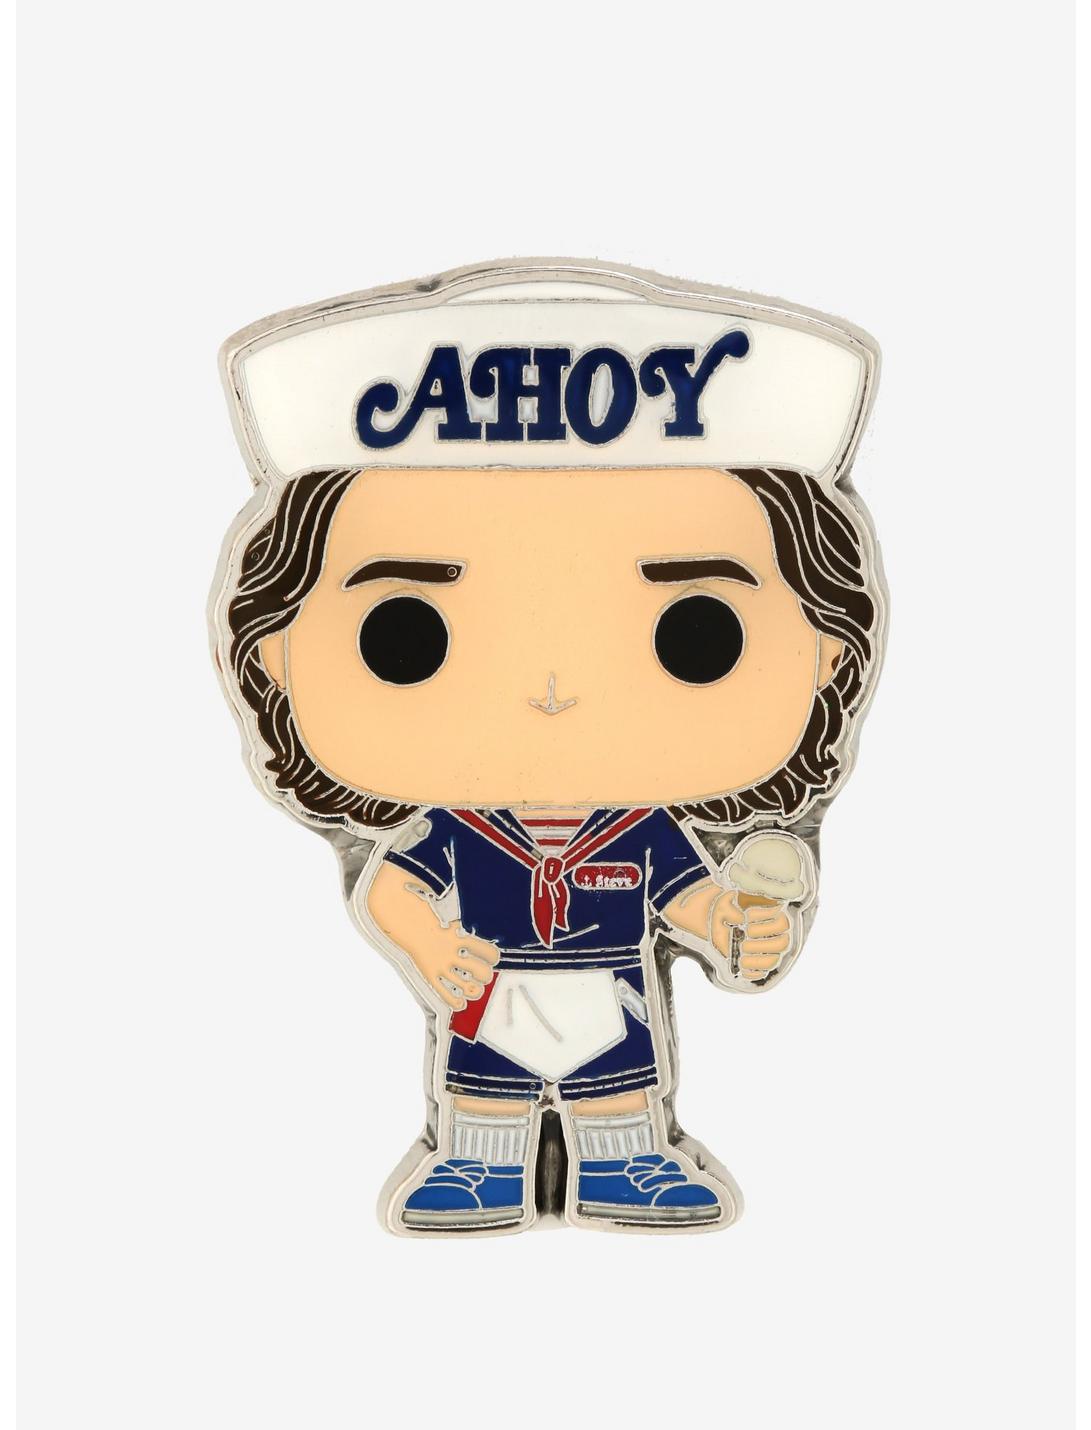 Plus Size Funko Pop! Stranger Things Scoops Ahoy Steve Enamel Pin - BoxLunch Exclusive, , hi-res